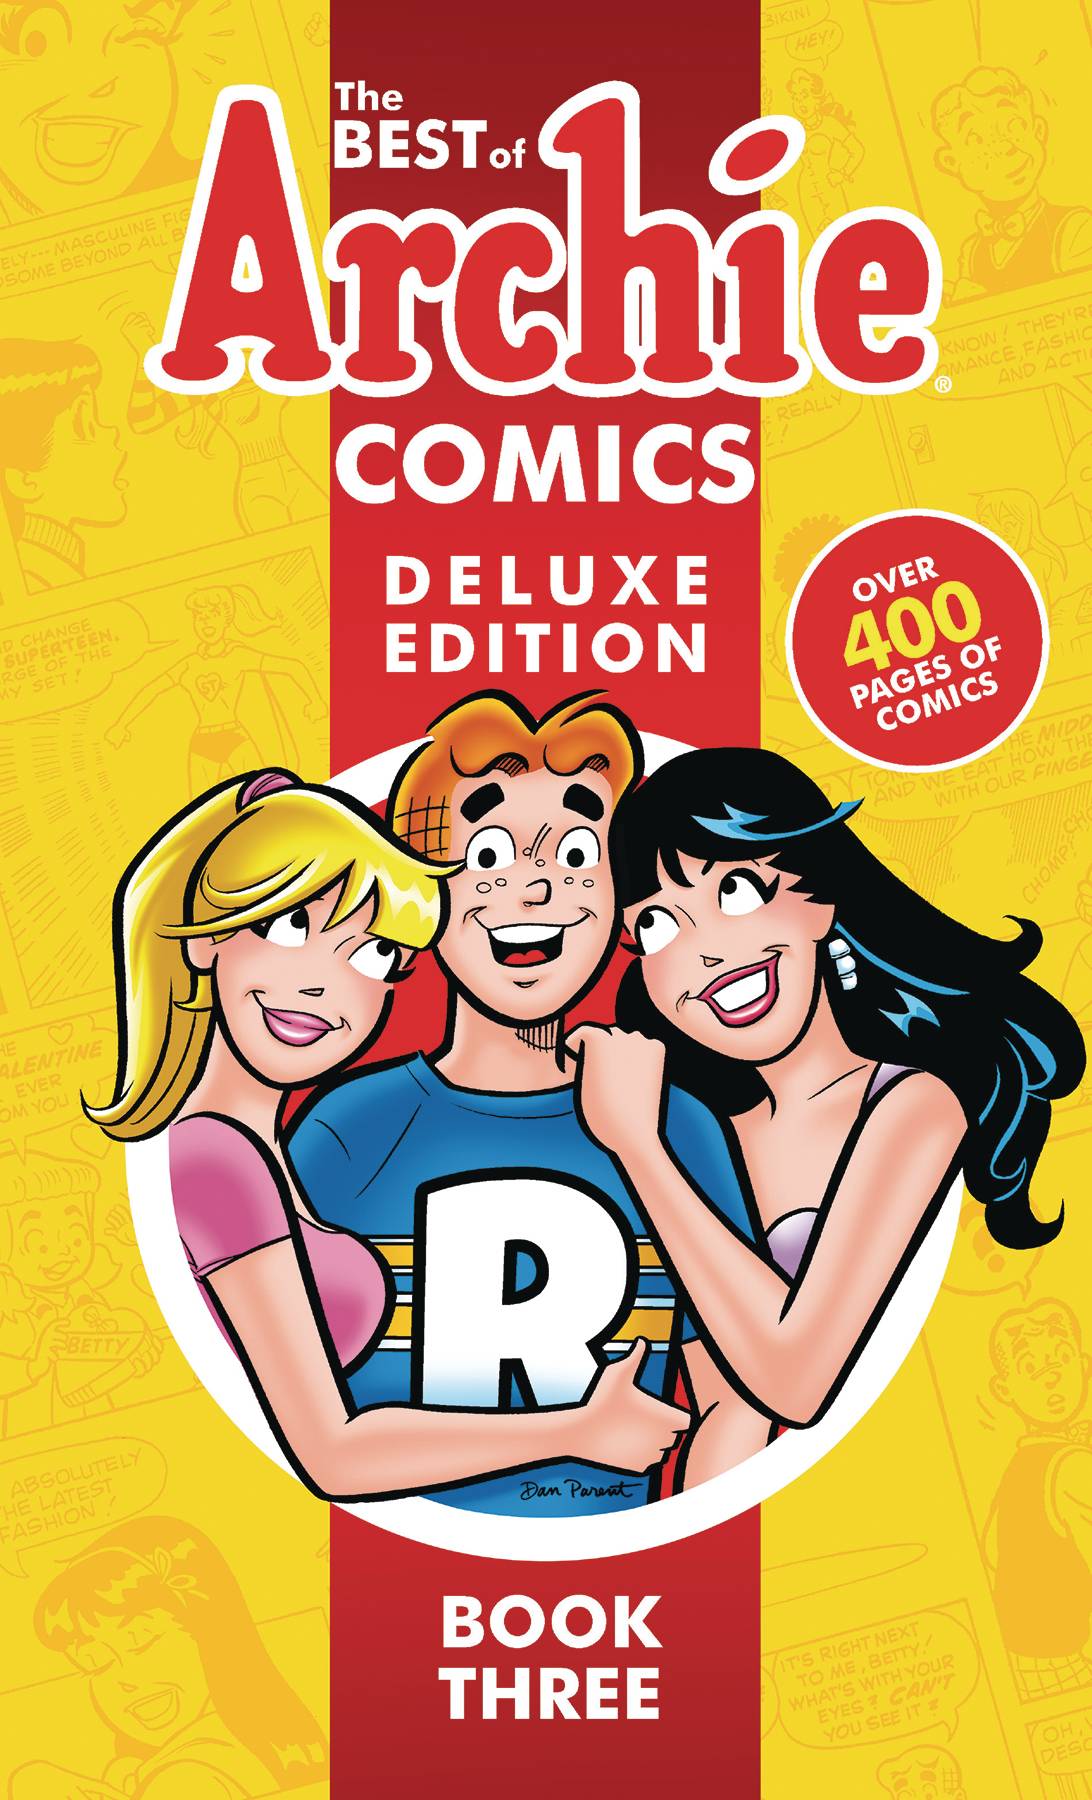 Best of Archie Comics Deluxe Edition Hardcover Volume 3